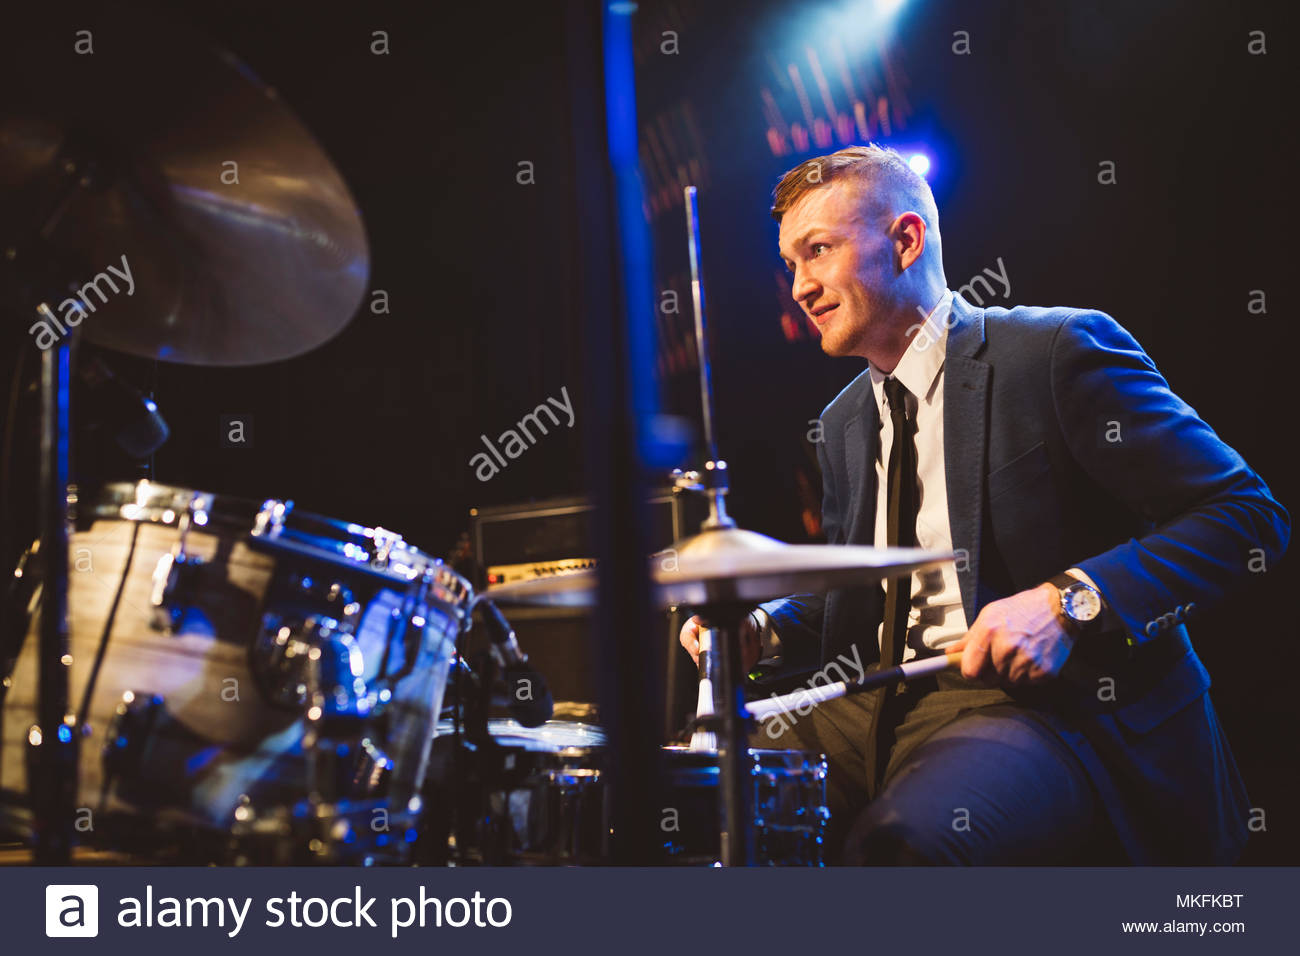 Confident musician playing drums on stage at music concert Stock Photo